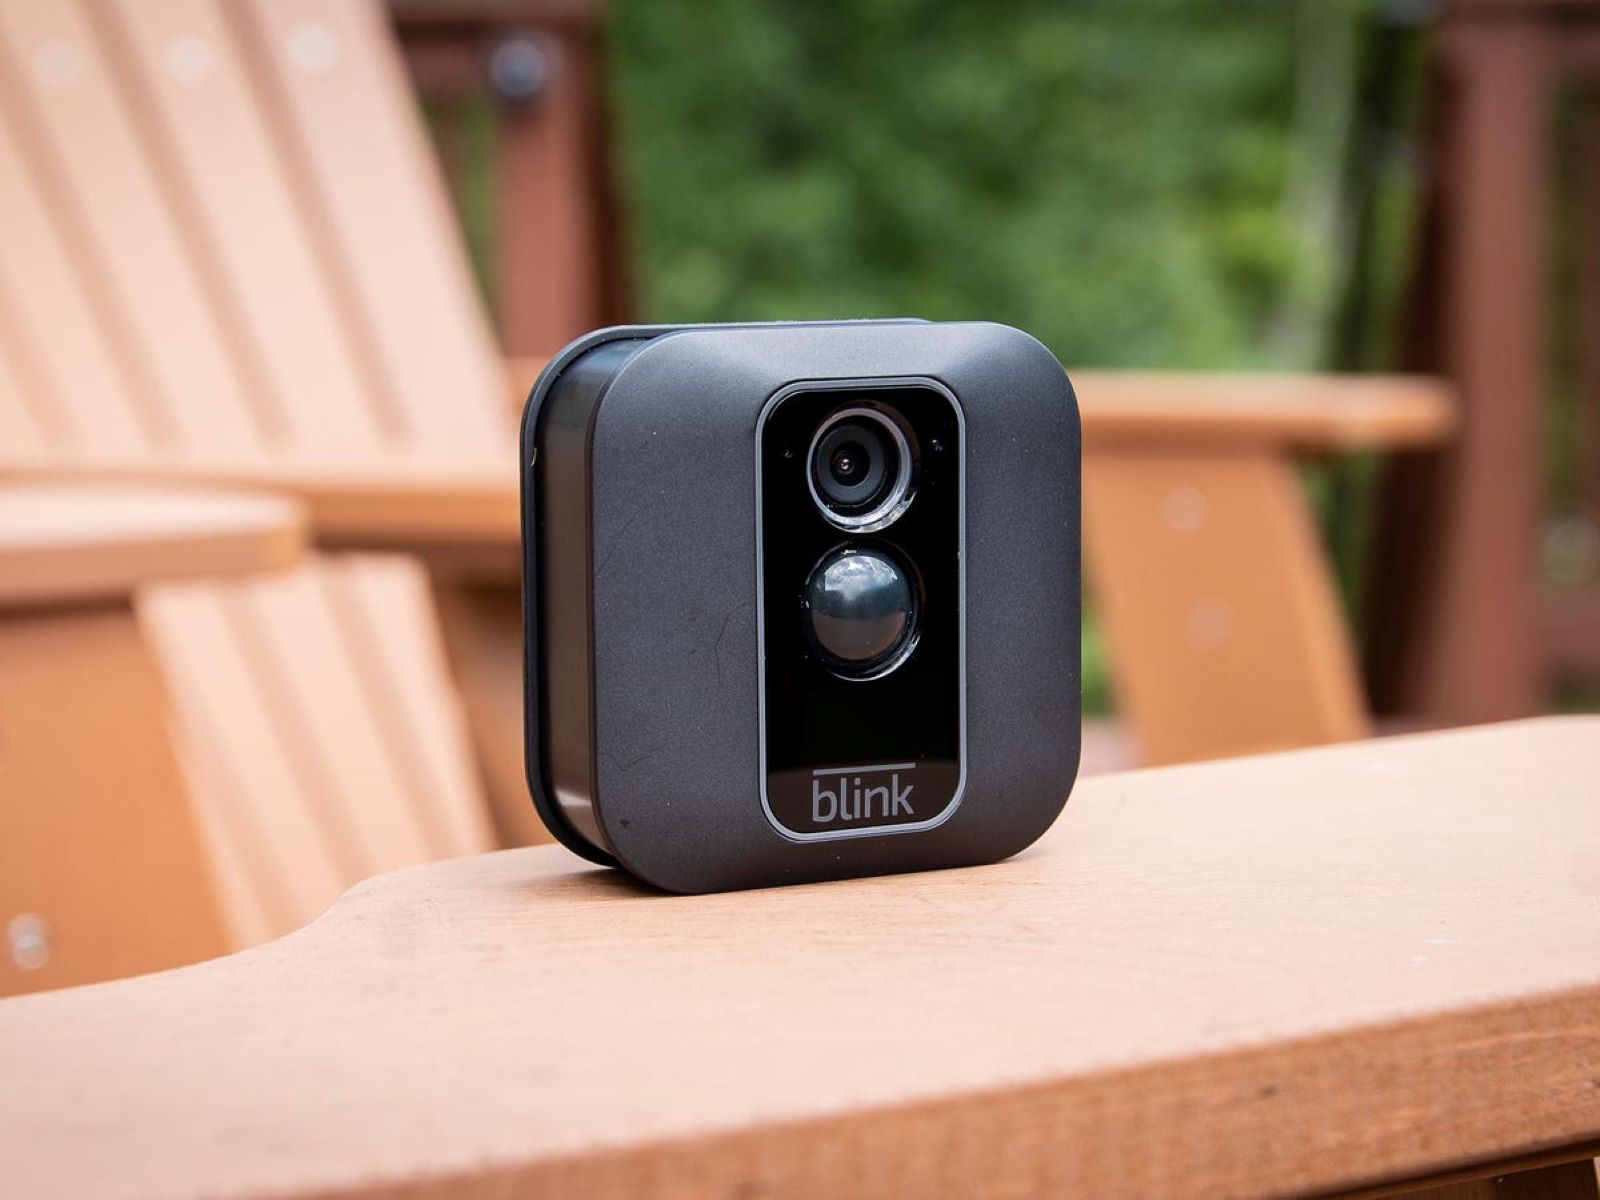 How To Change Wi-Fi On Blink Outdoor Camera